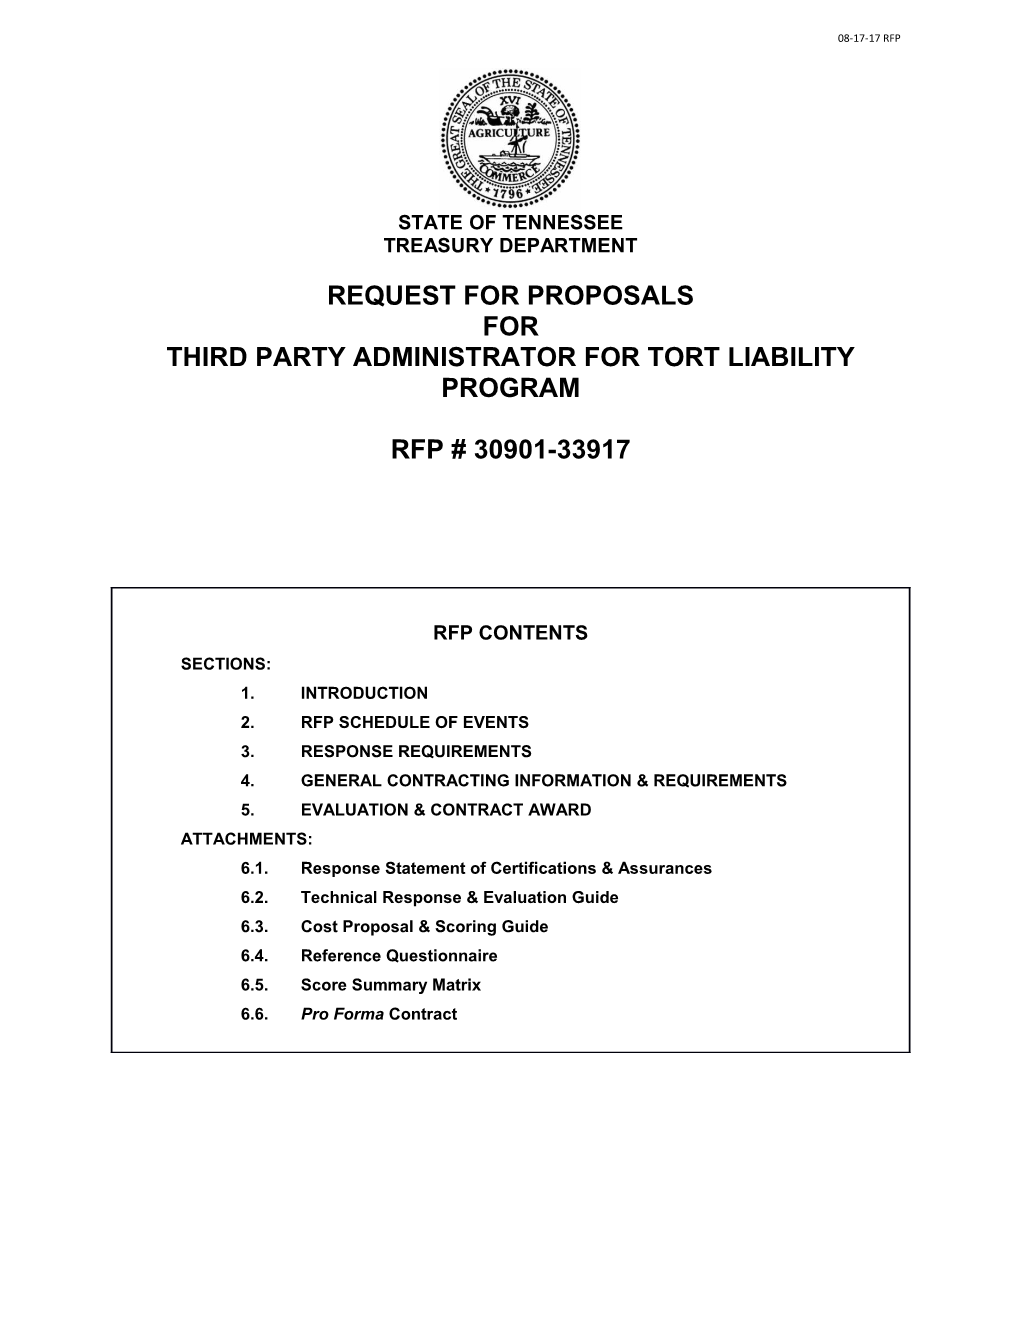 Third Party Administrator for Tort Liability Program